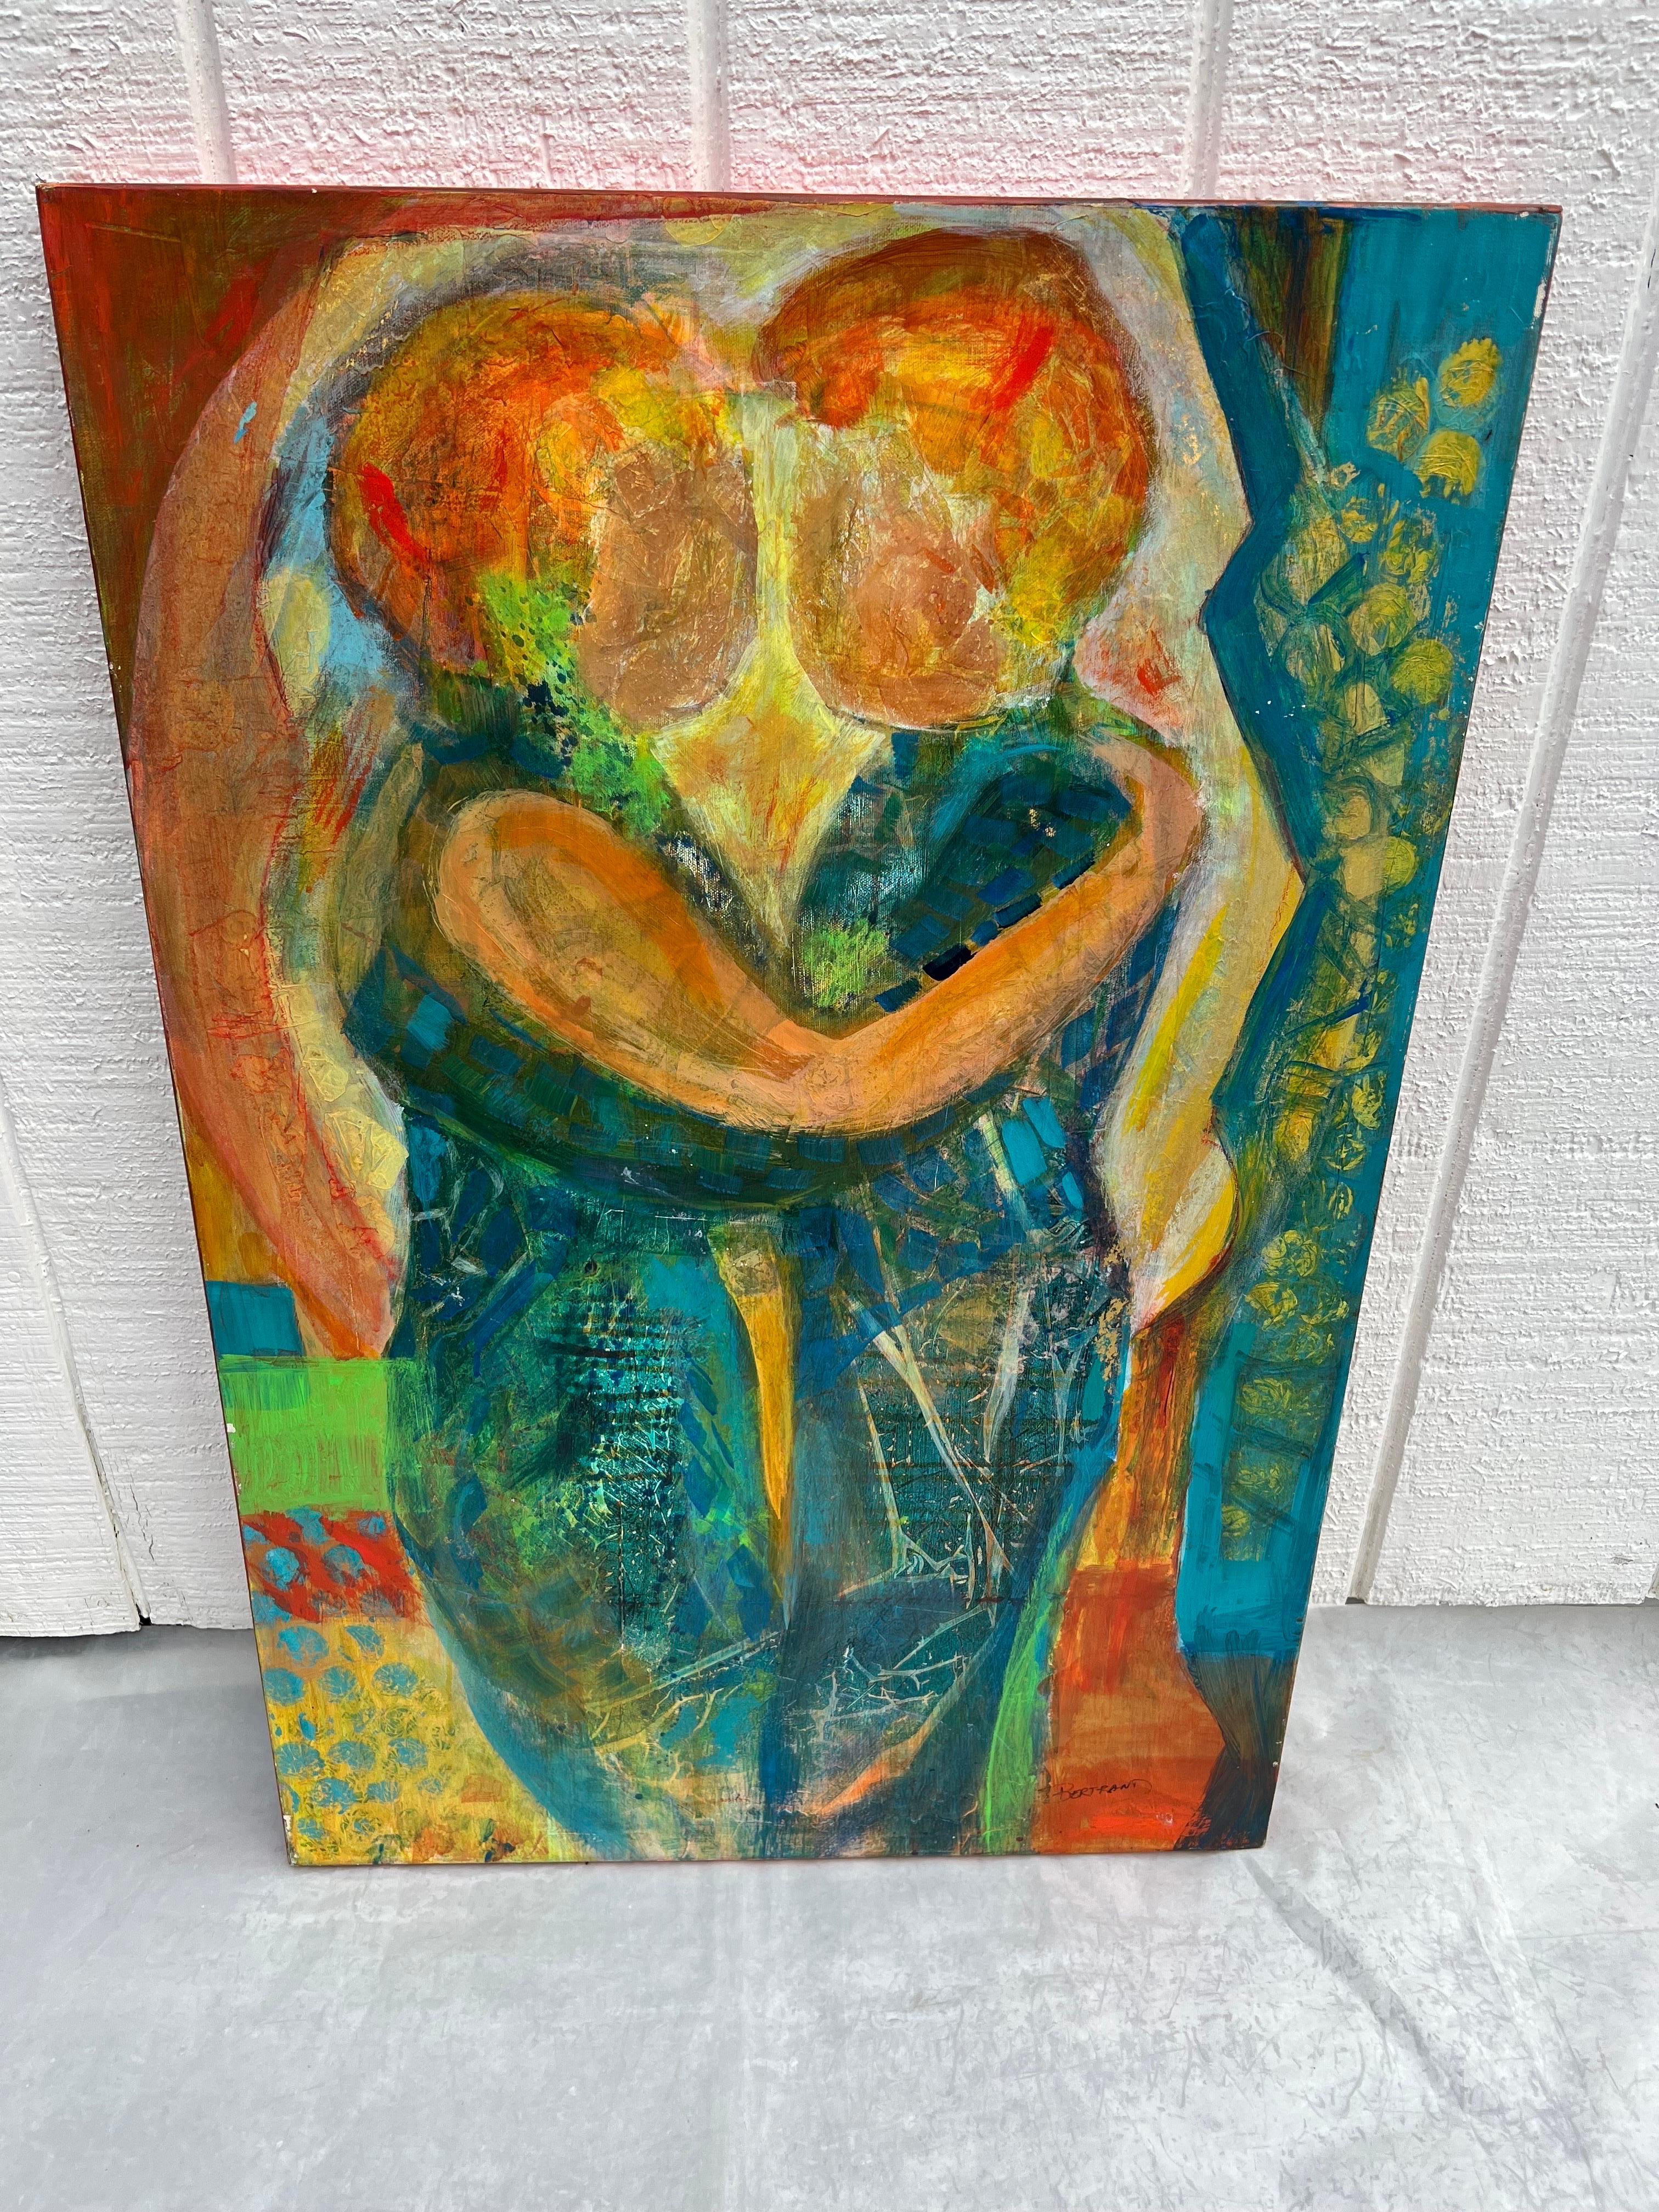 Signed Carol Bertrand Colorful Abstract painting of a couple embracing.
Nice colorful composition of greens, blues and orange depicting LOVE.
Carol Kuhlman Bertrand grew up in Missouri and studied Occupational Therapy at Mount Mary College in